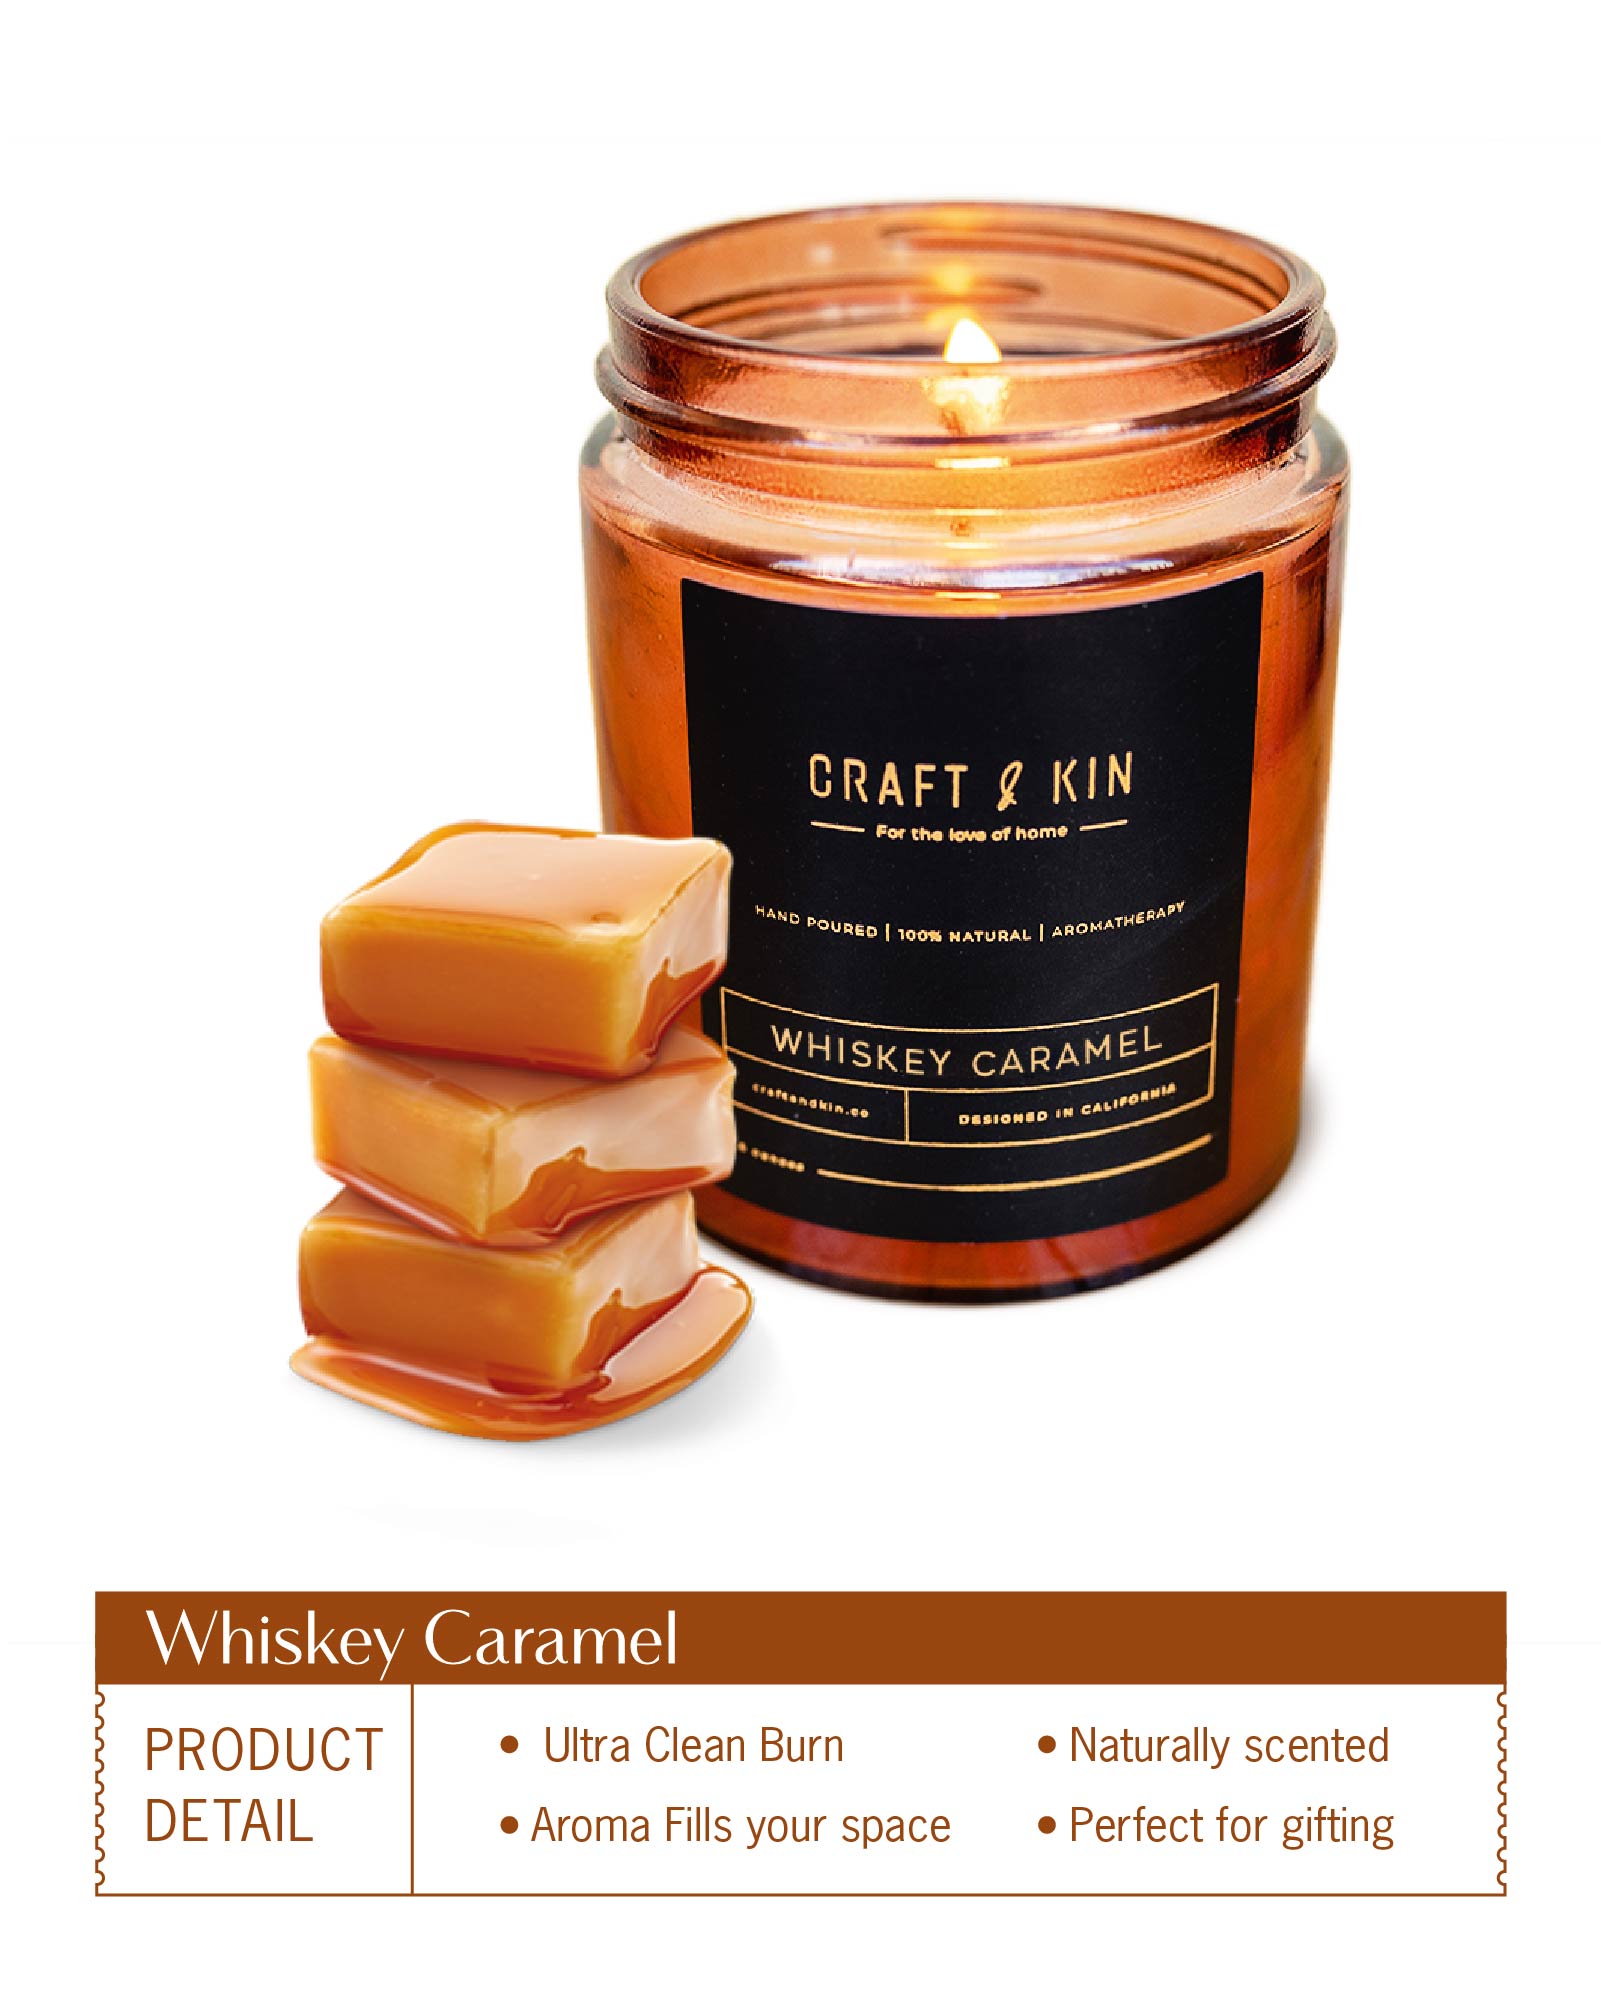 Scented Candles for Men | Premium Whiskey Caramel Scented Candle | All-Natural Whiskey Candle Soy Candles, Rustic Home Decor Scented Candles | Non-Toxic, Ultra Clean Burn Aromatherapy Amber Jar Candle - image 5 of 5